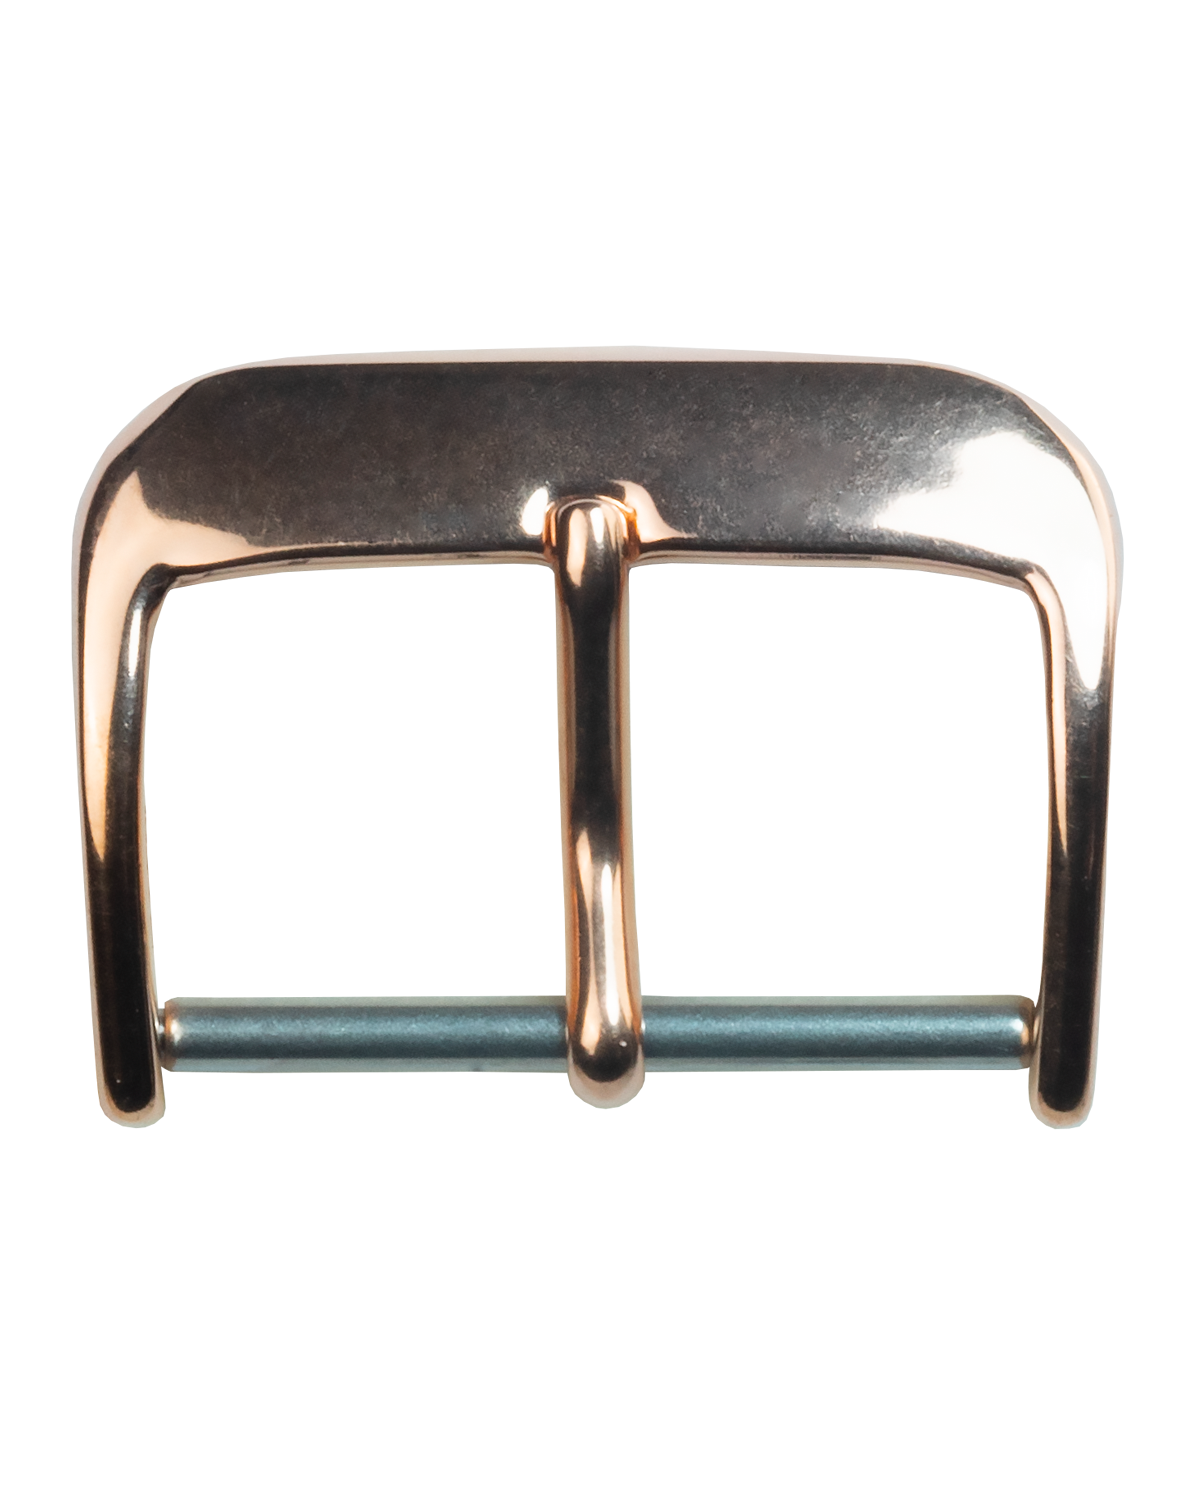 EULIT pin buckle, rose gold plated